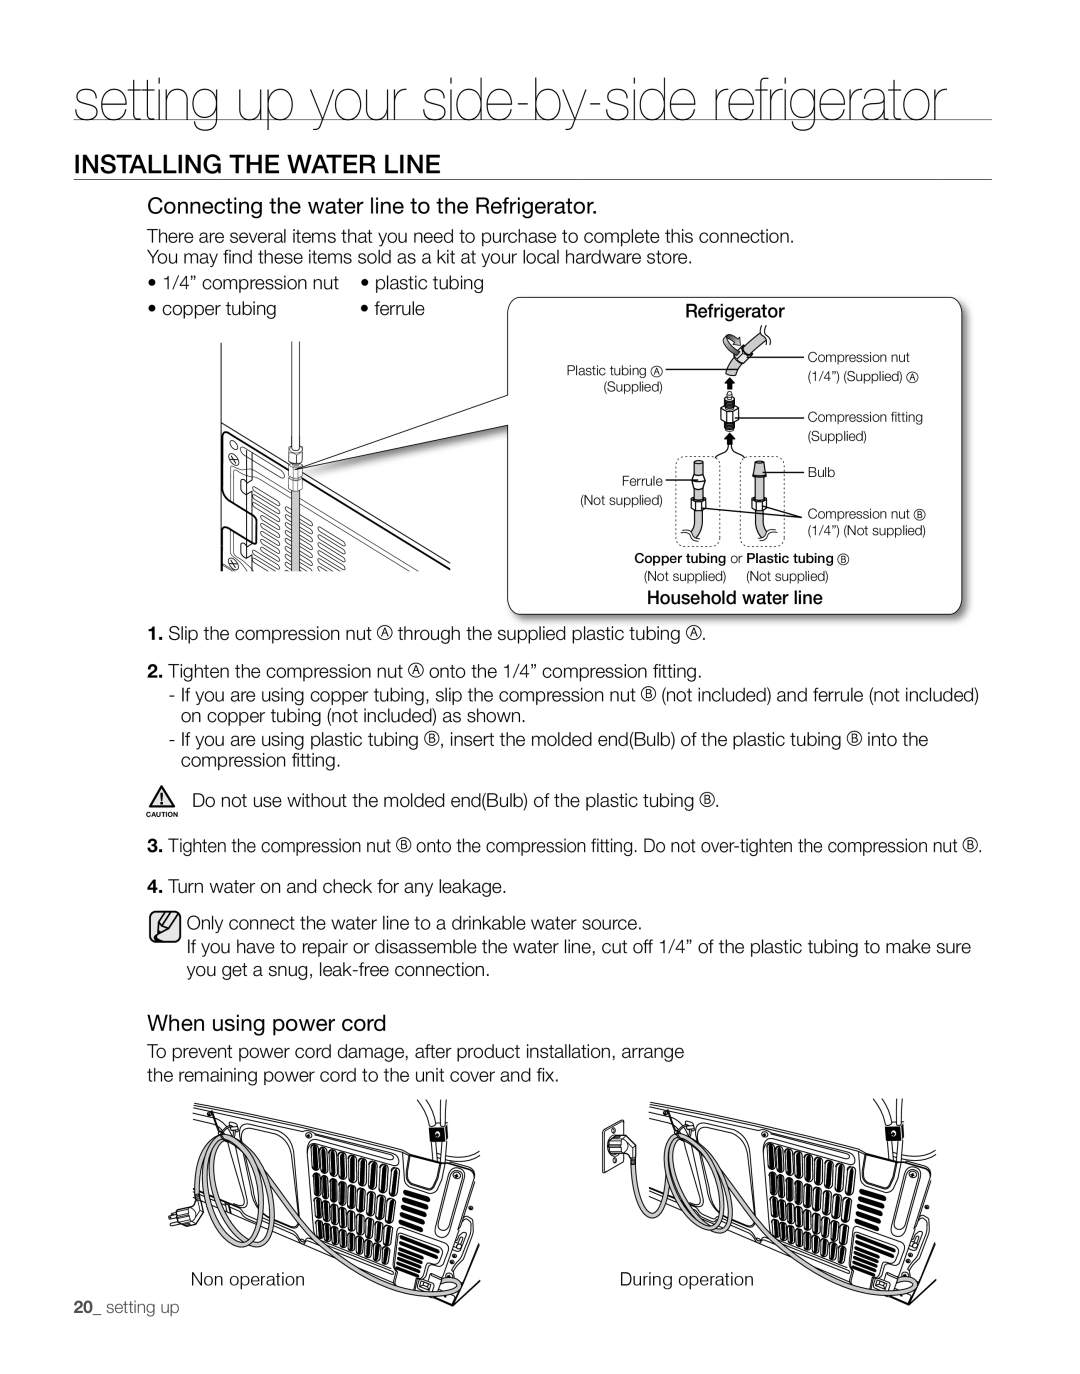 Samsung RS267TDPN user manual Installing The Water Line, setting up your side-by-side refrigerator, When using power cord 